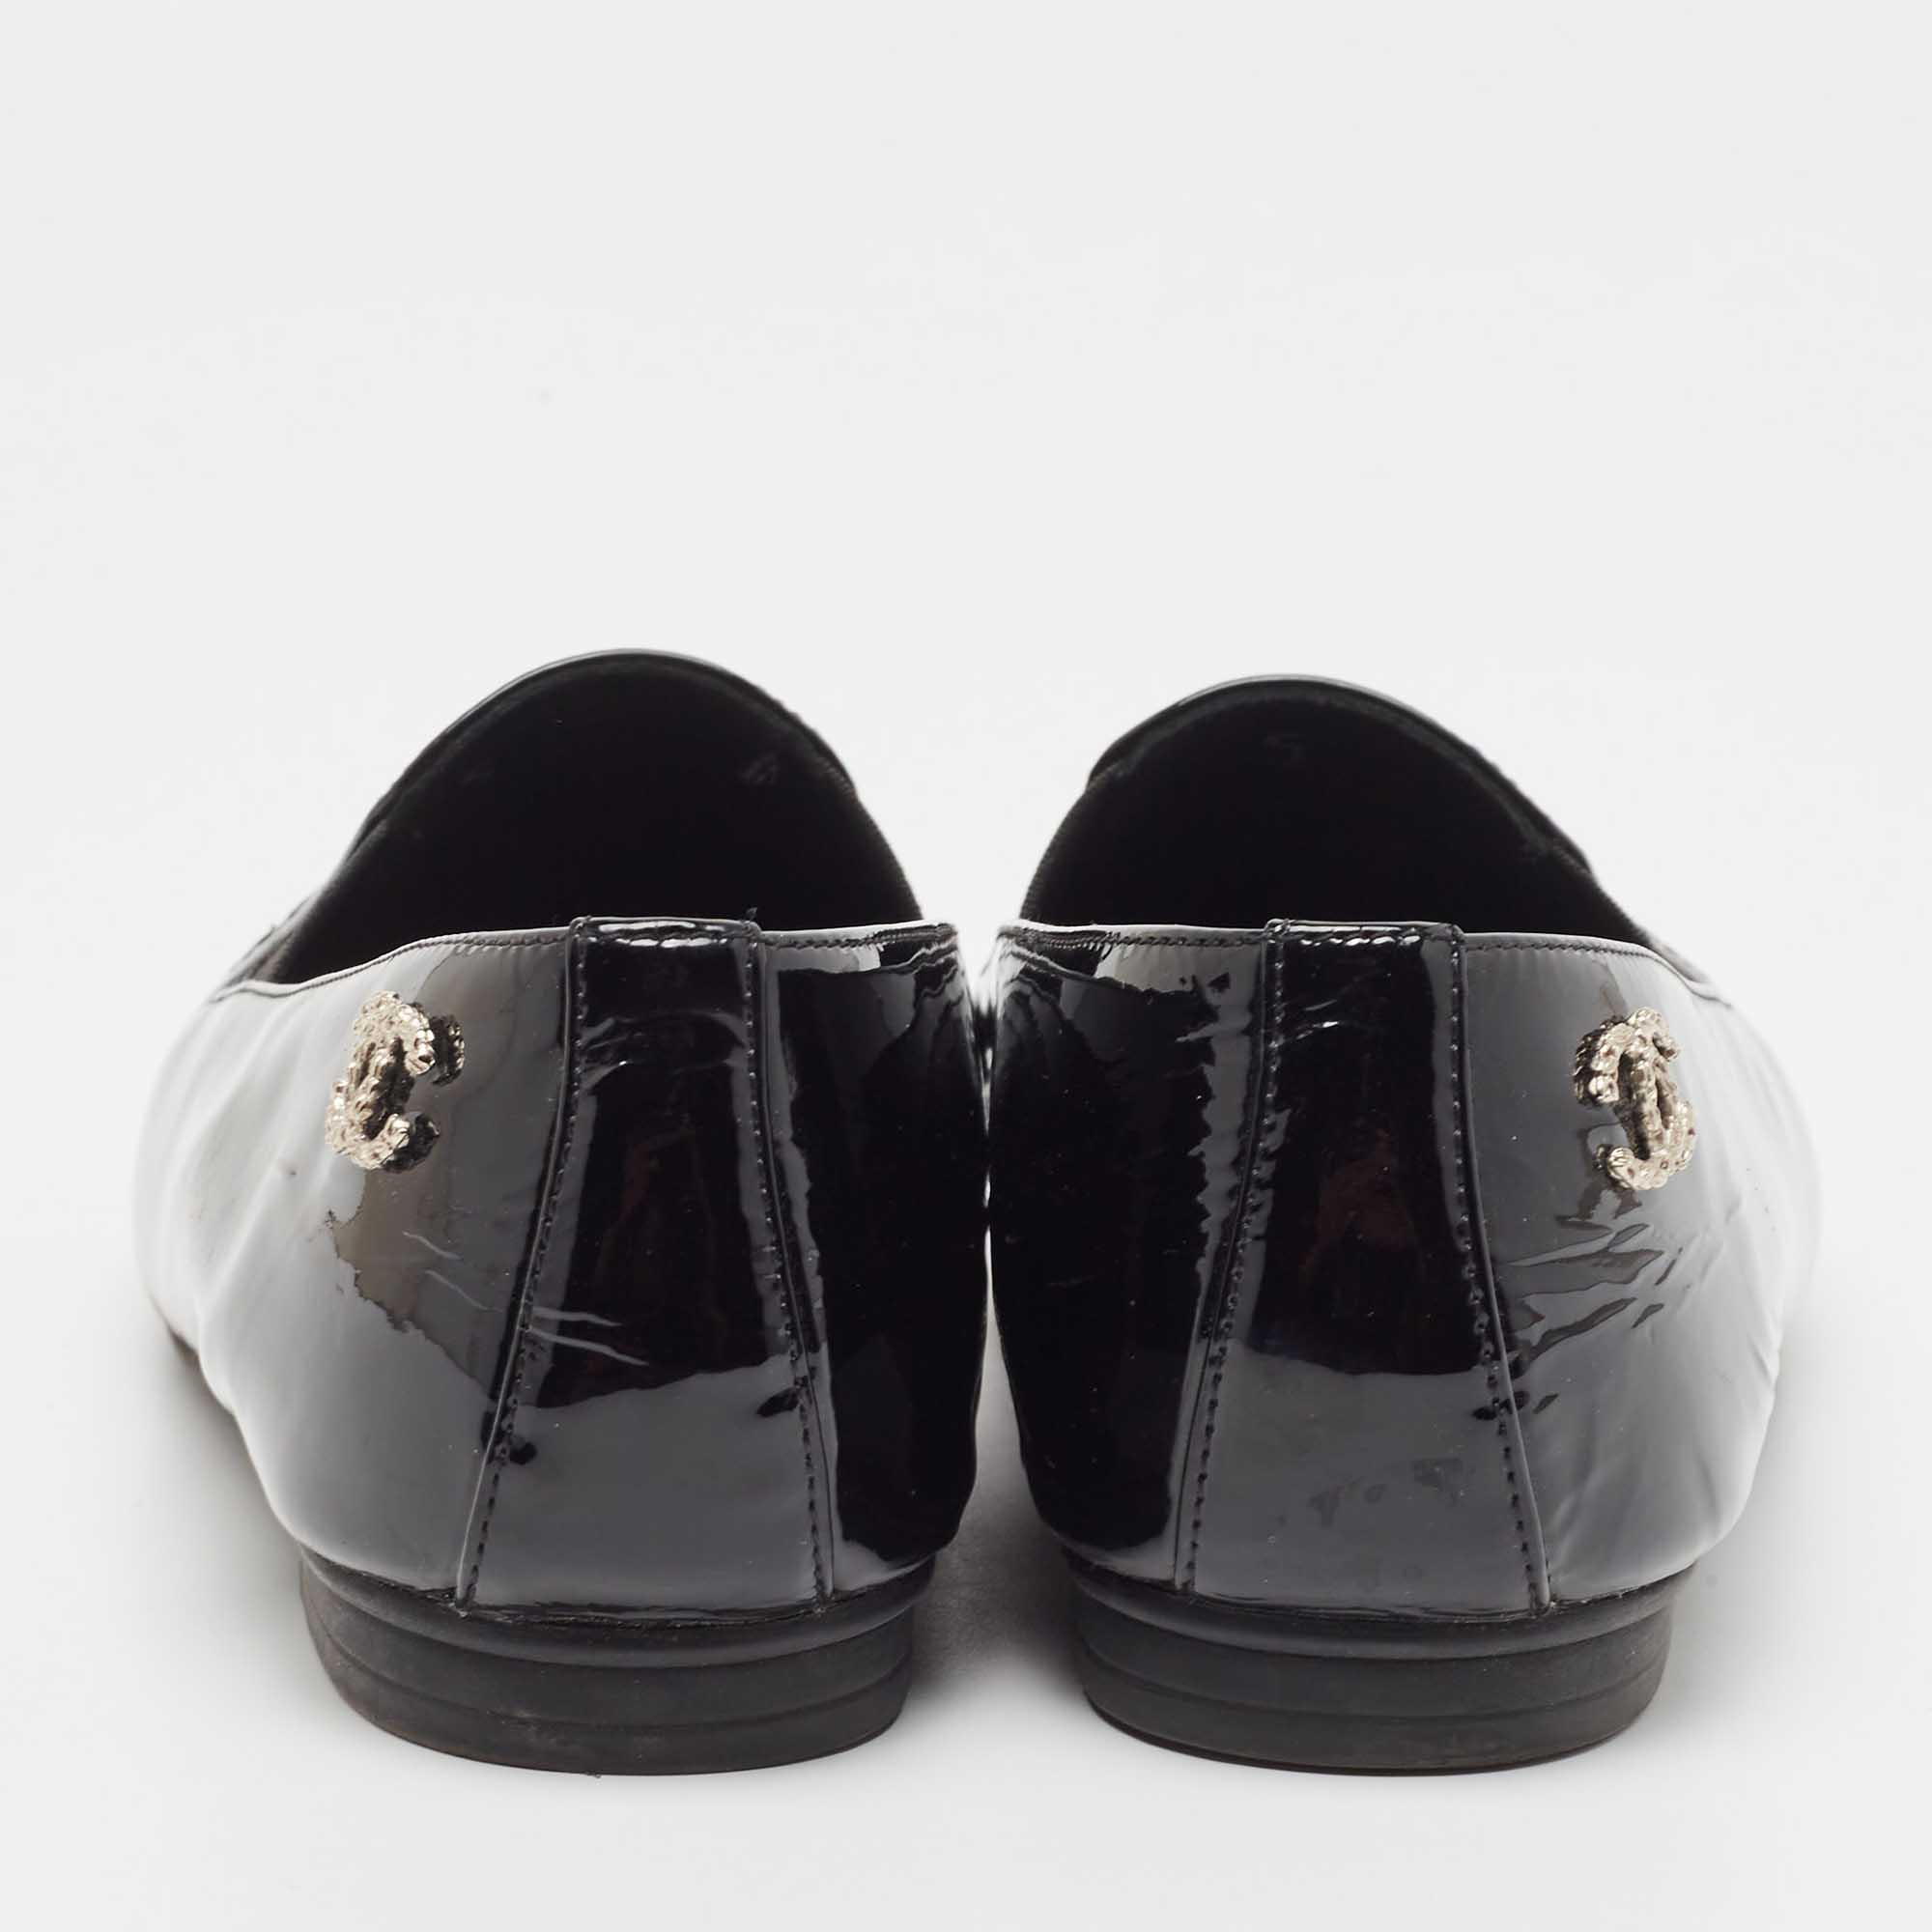 Chanel Black Patent Leather CC Camellia Loafers Size 38